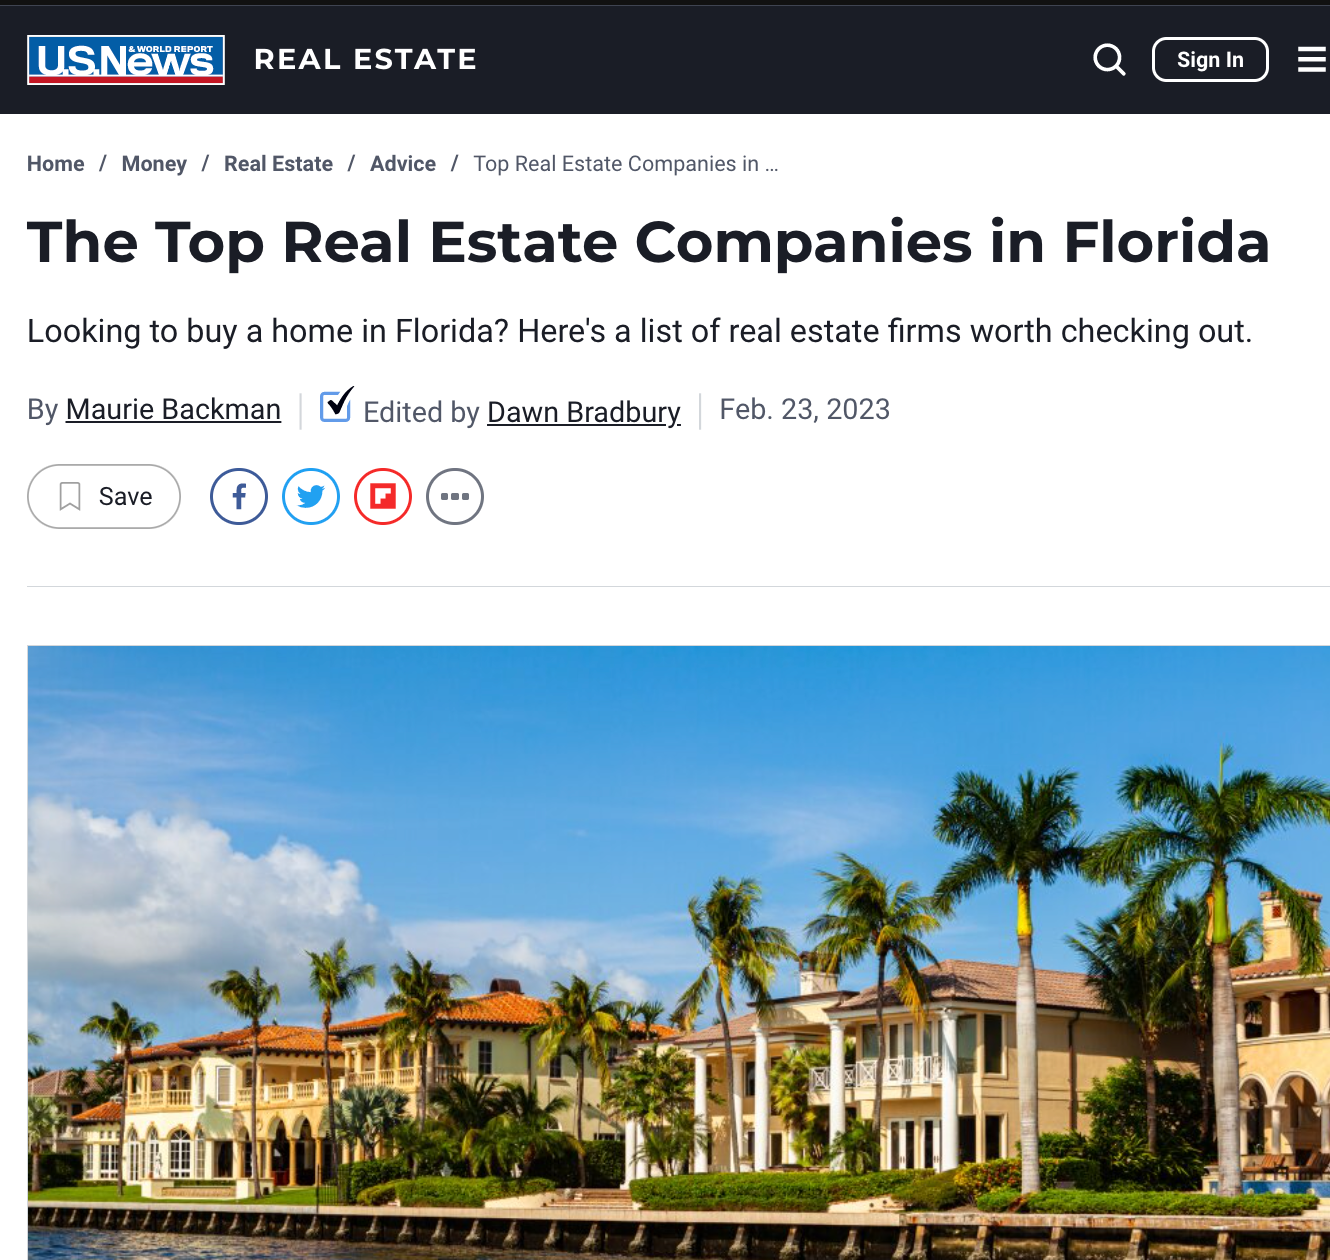 Wemert Group Realty was honored to be included in US News & World Report's Top Real Estate Companies in Florida article